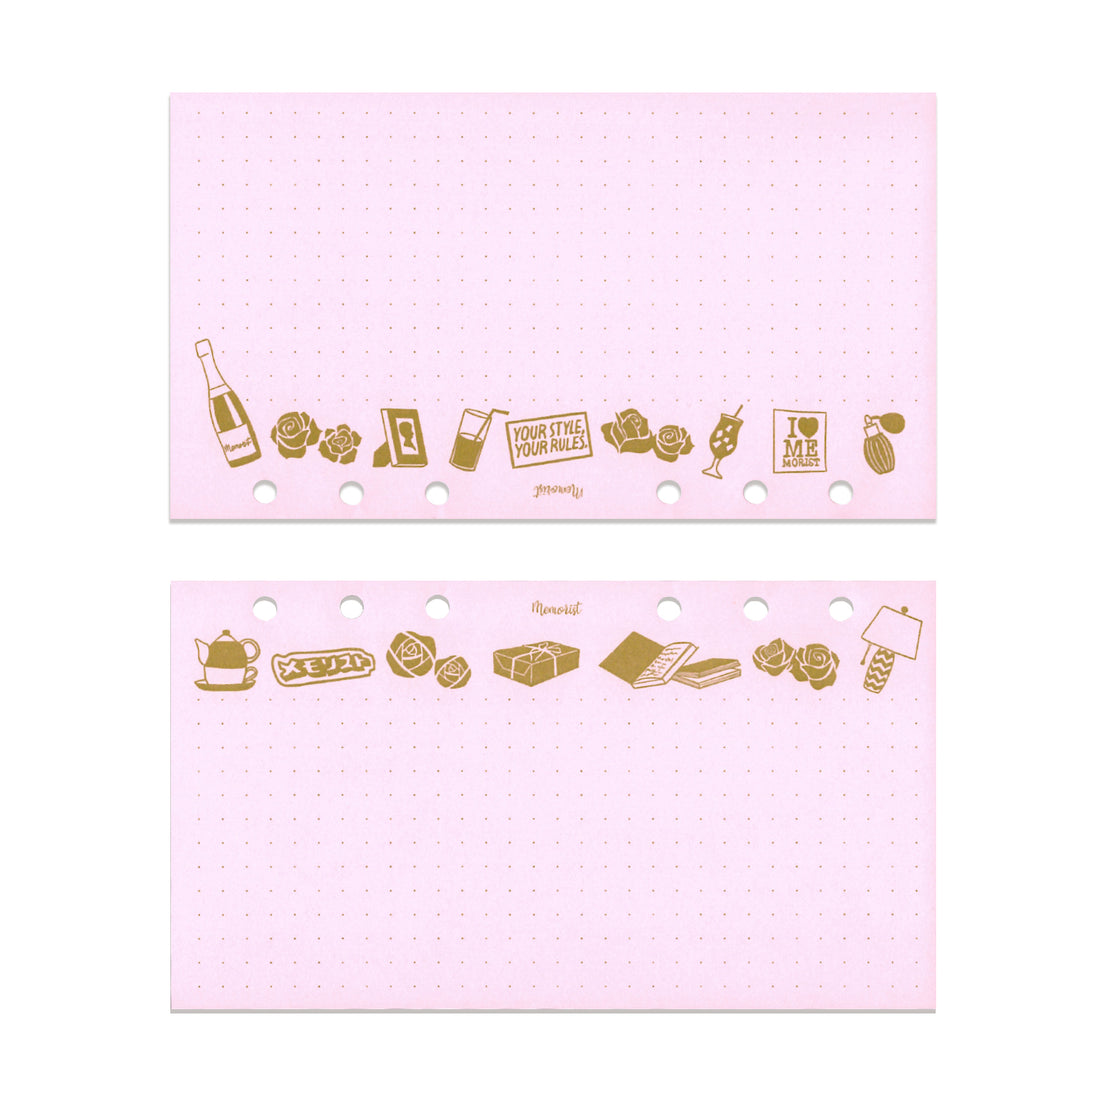 Dotted-Grid Color Sideway Refill【Pink x Pink】(Personal Size)